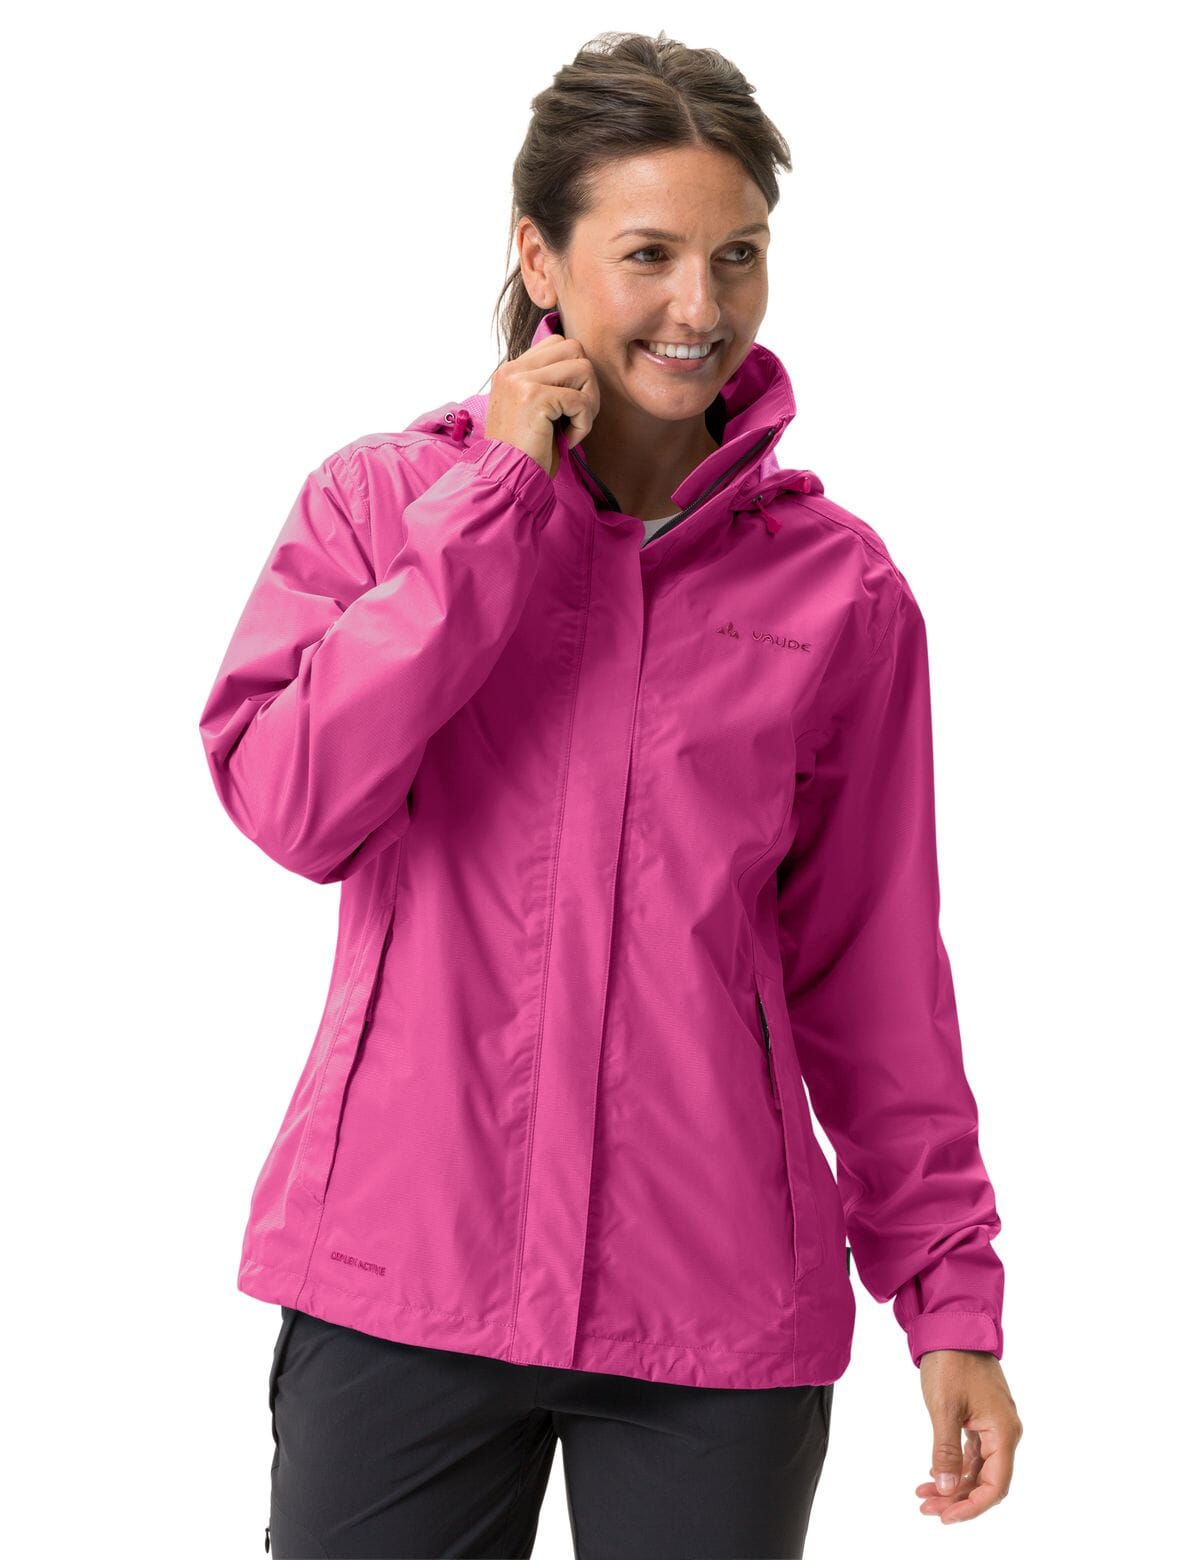 Vaude - W´s Escape Light rain jacket - Recycled polyester & polyester - Weekendbee - sustainable sportswear